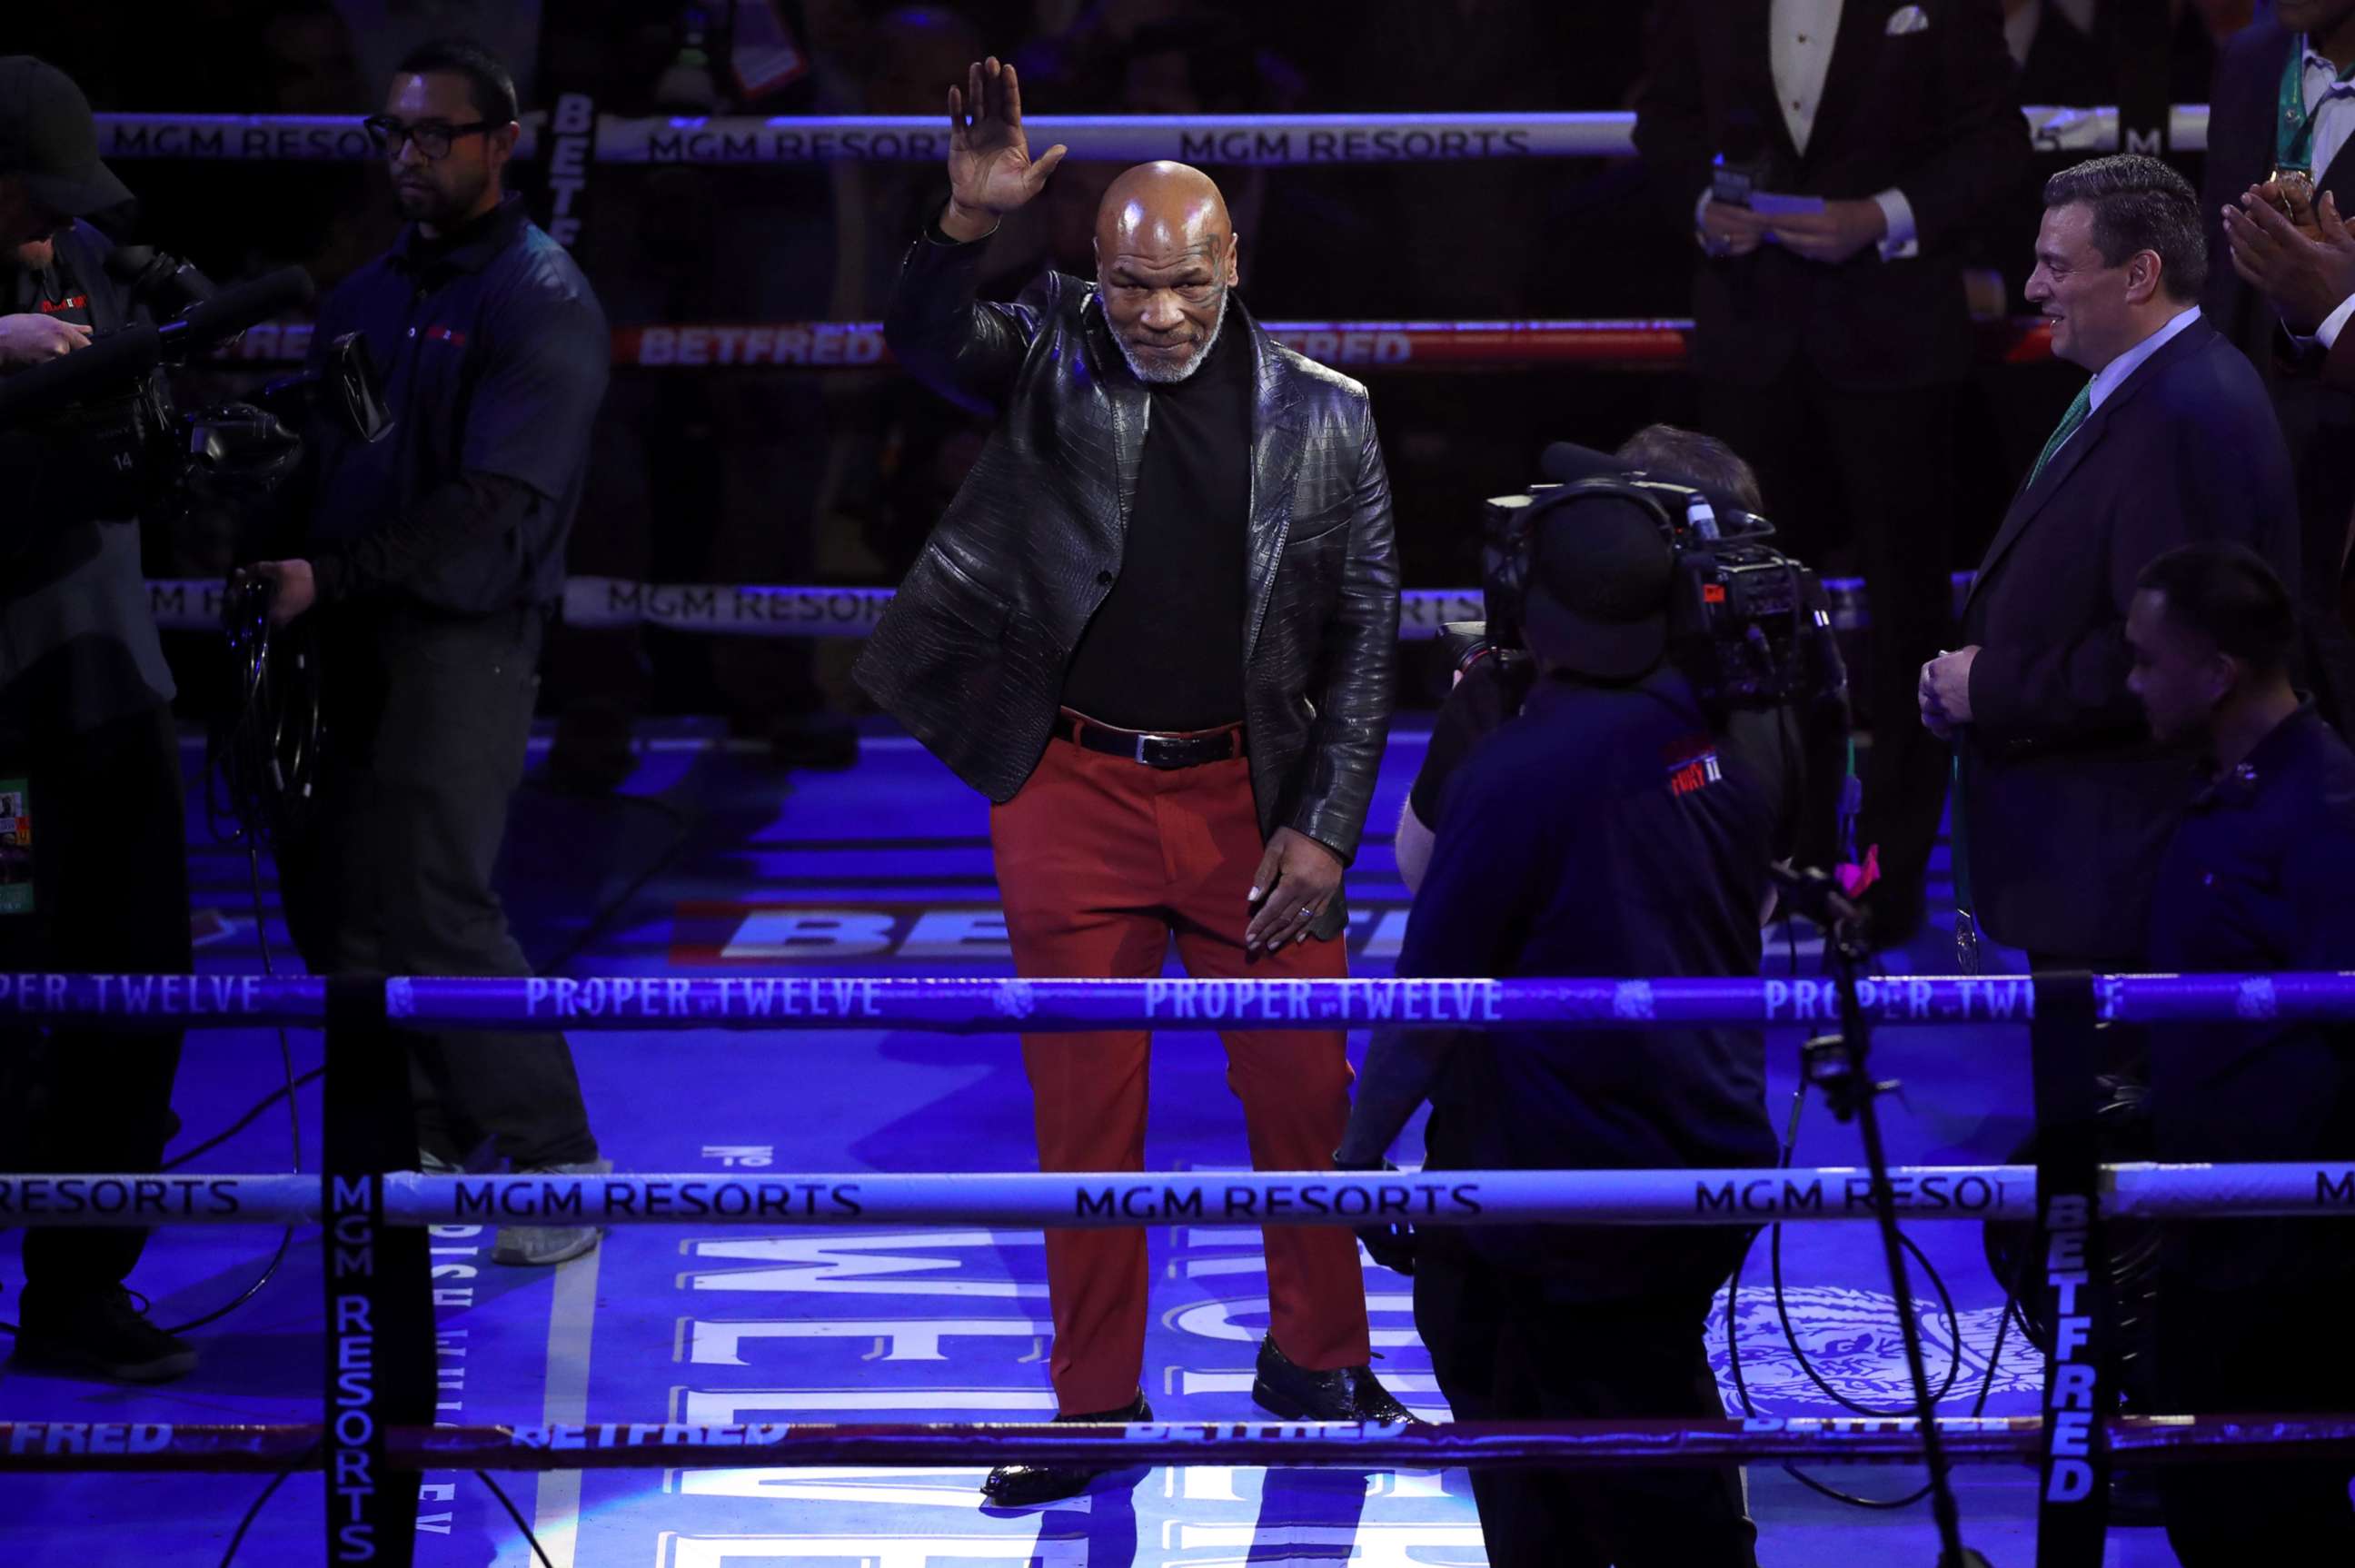 PHOTO: In this Feb. 22, 2020, file photo, Mike Tyson is honored at the MGM Grand, Las Vegas.